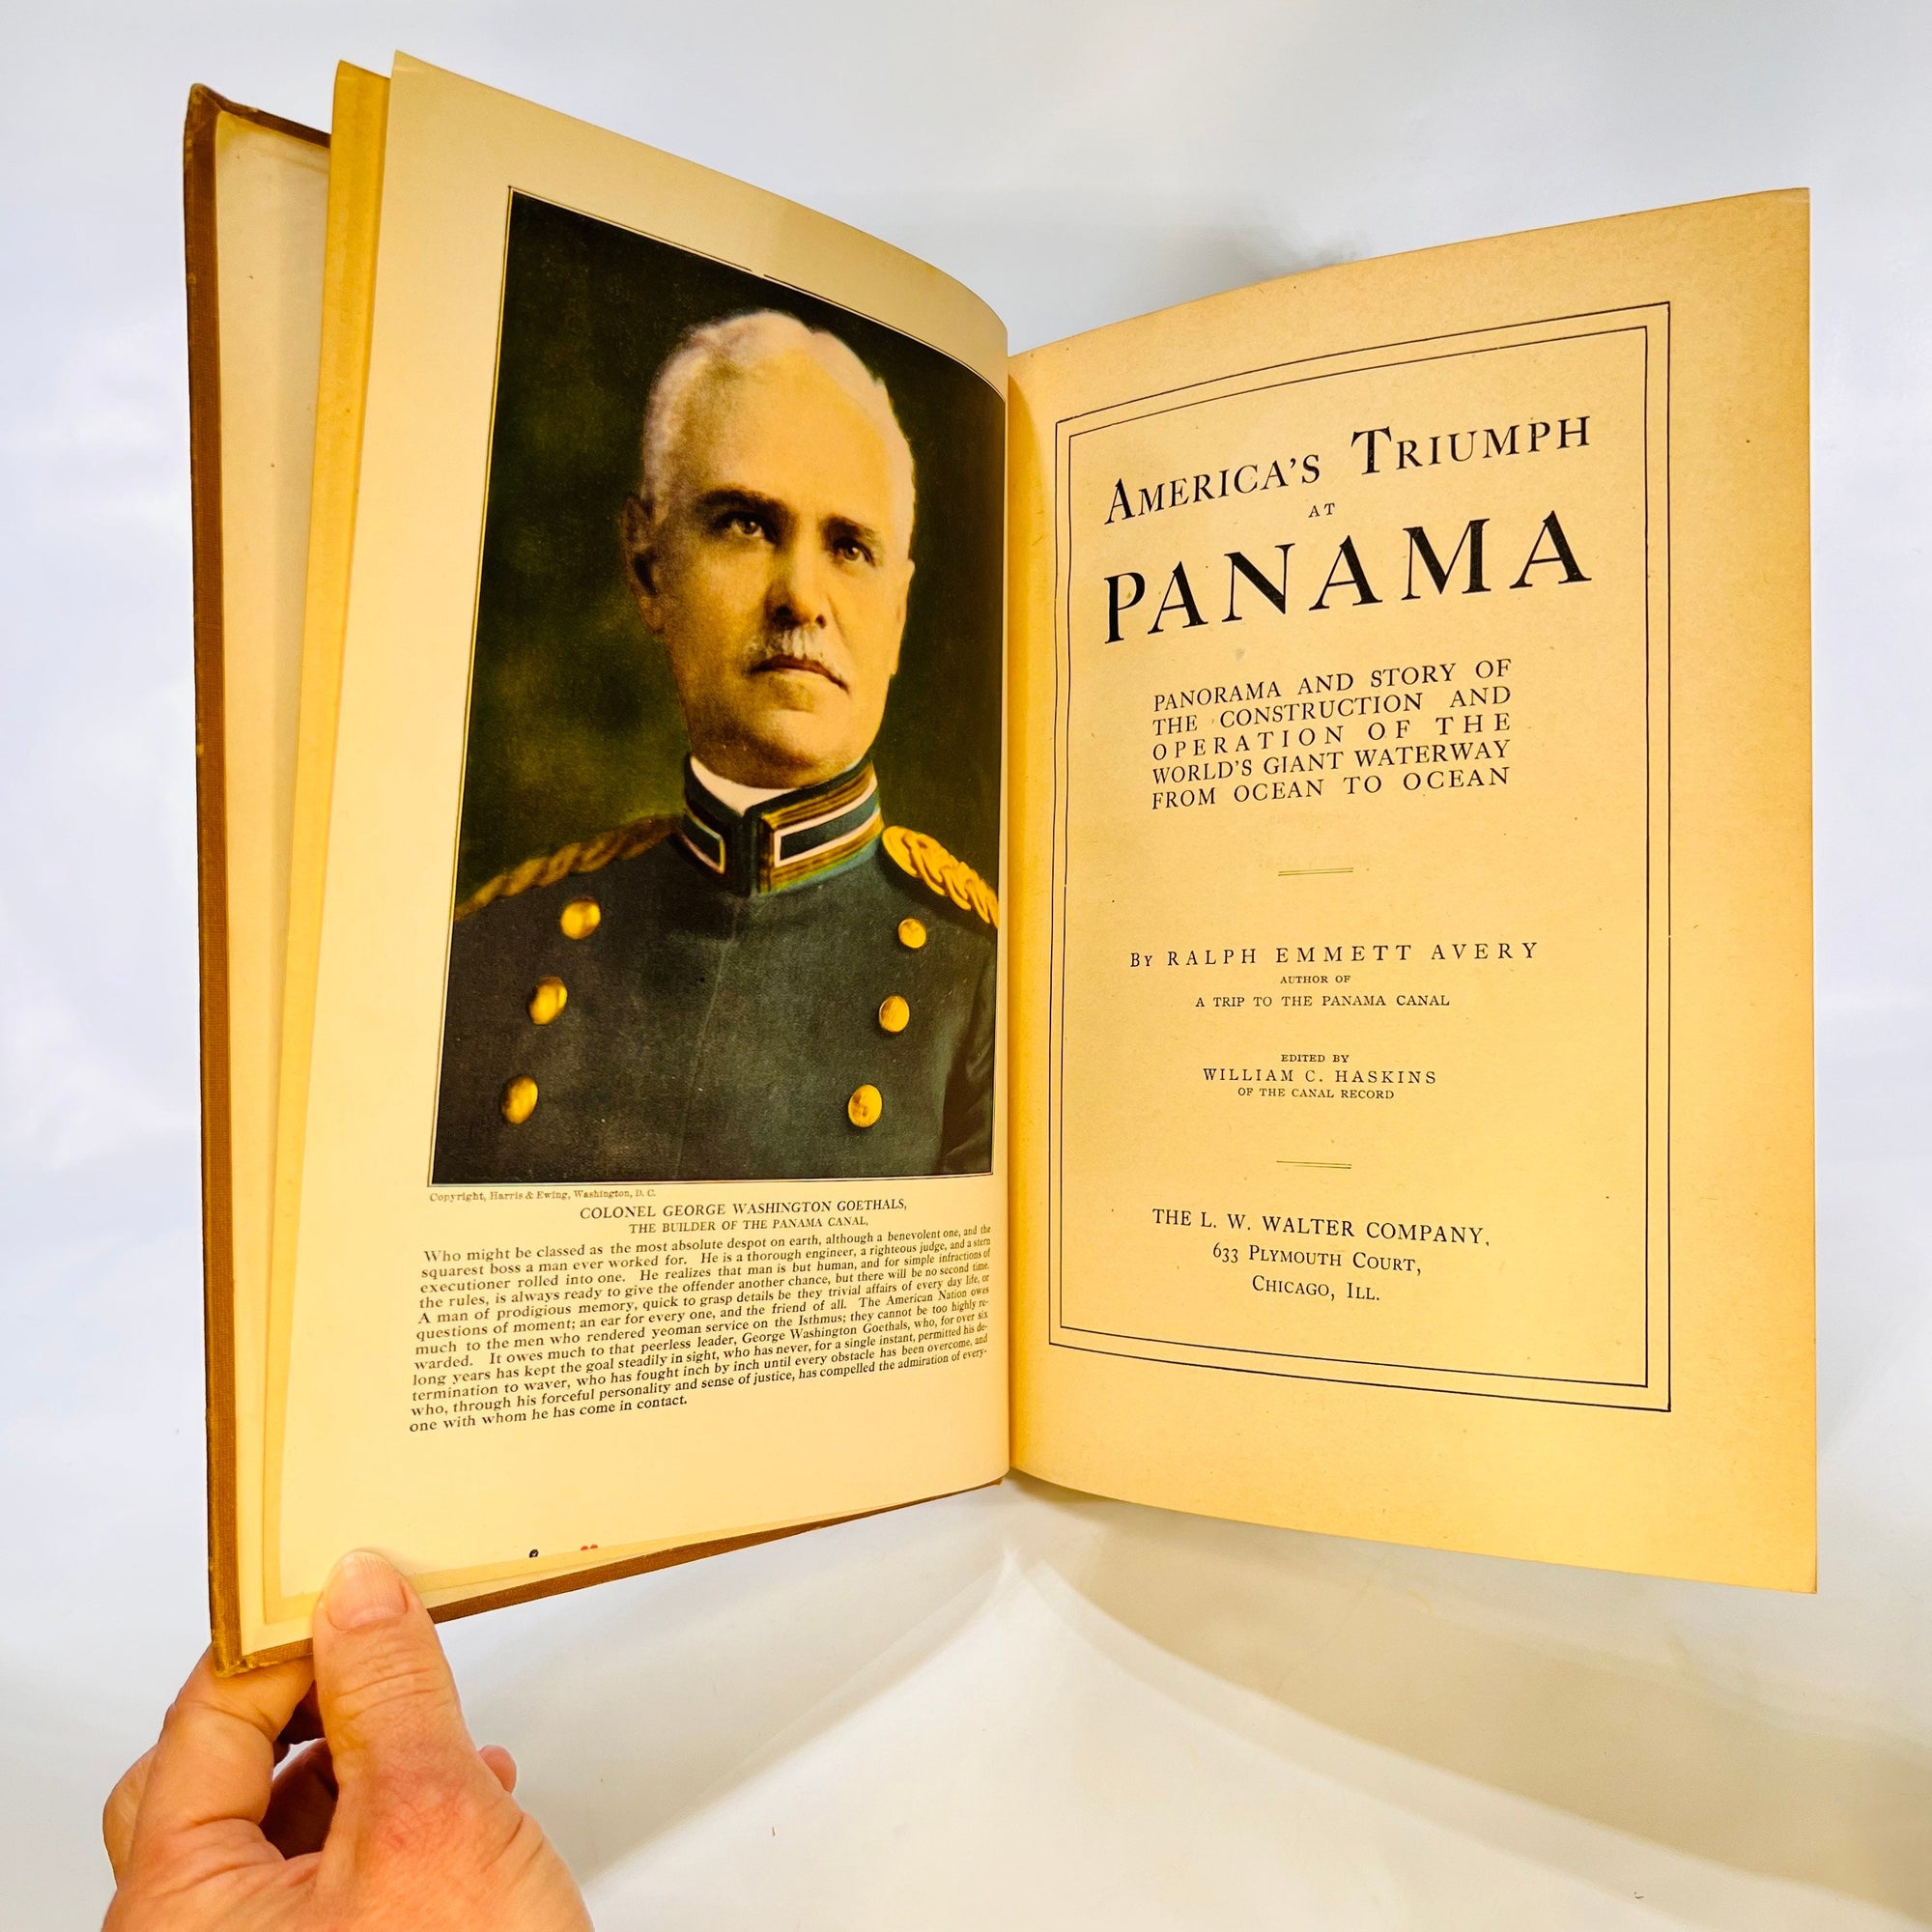 America's Triumph at Panama by Ralph Emmett Avery 1913 Vintage Book History of the Panama Canal